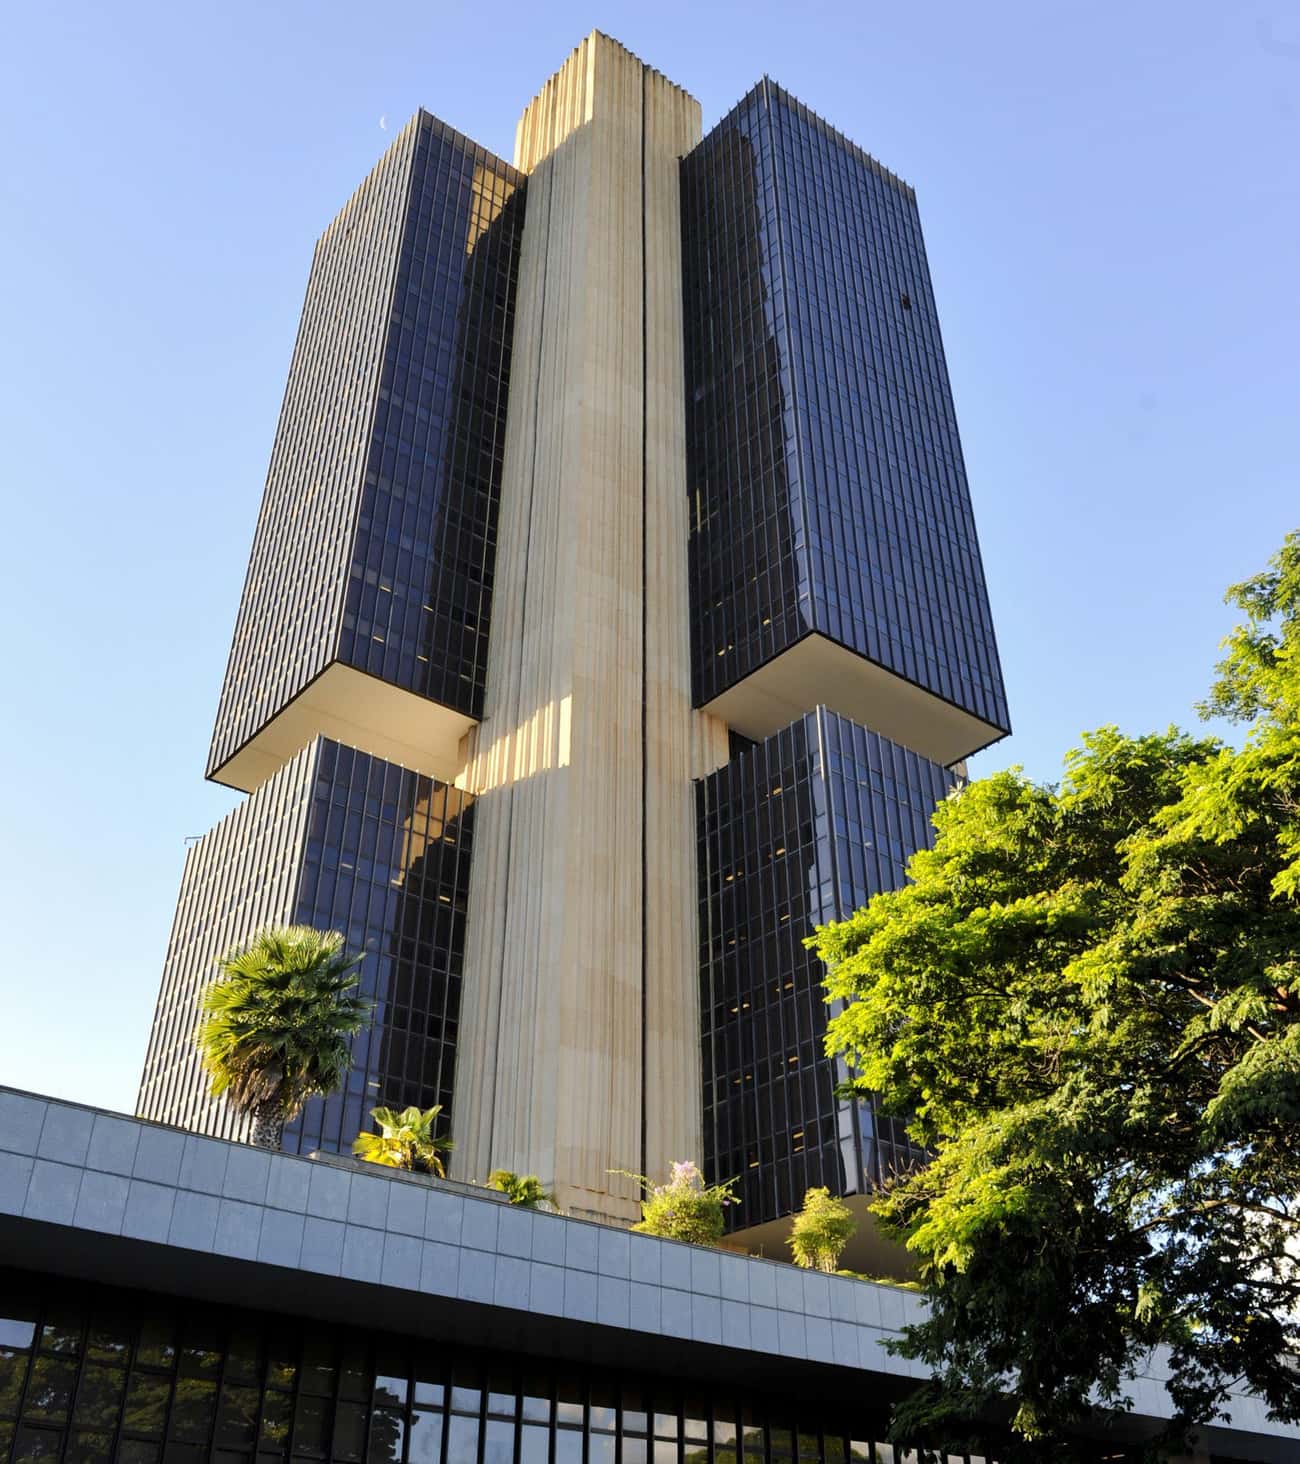 Men Dug A 600-Meter Tunnel To Break Into Brazil's Central Bank